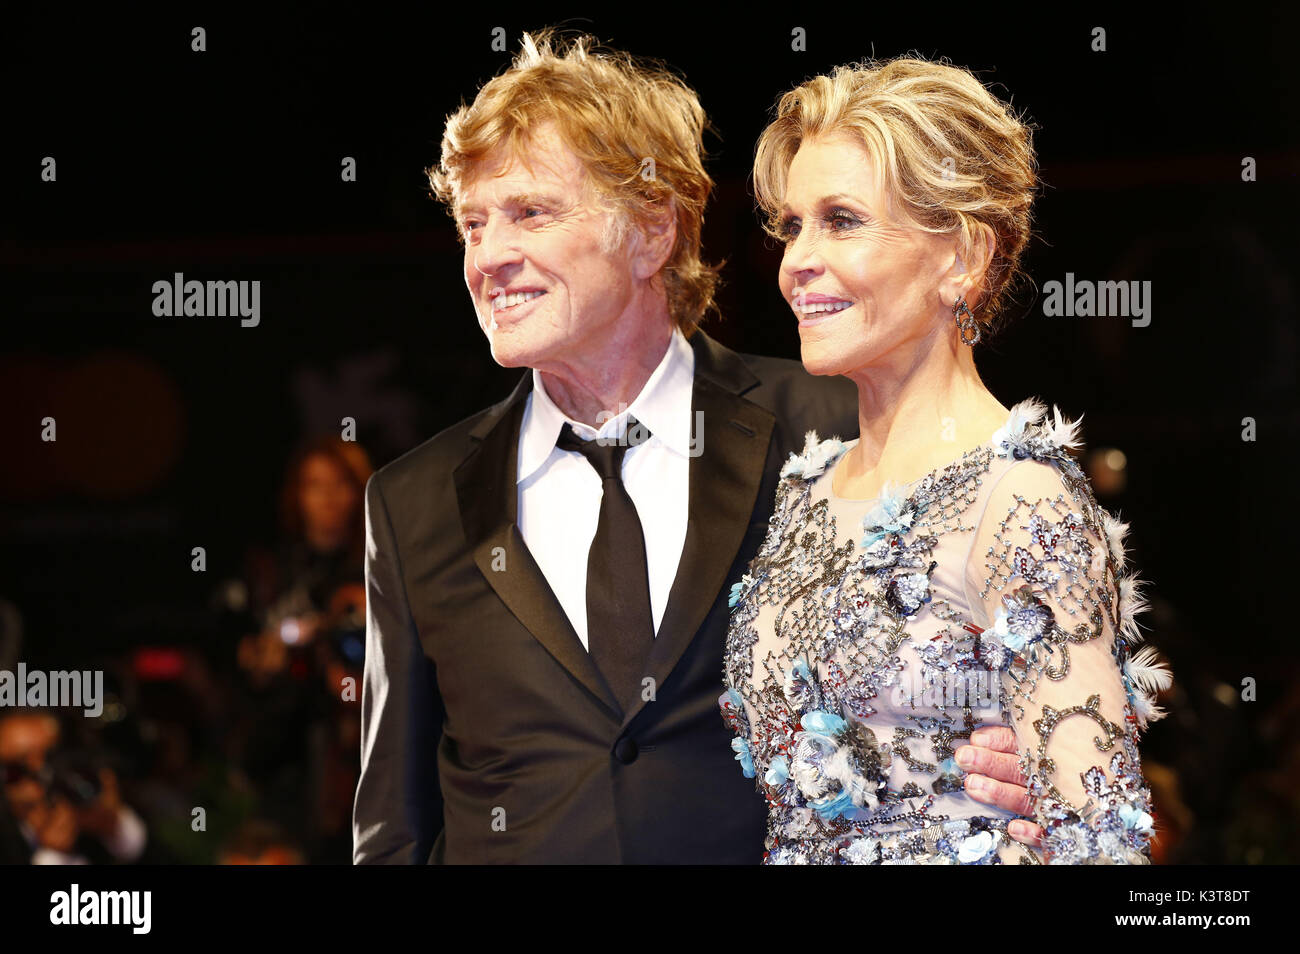 Venice, Italy. 01st Sep, 2017. Robert Redford and Jane Fonda attending the 'Our Souls at Night' premiere at the 74th Venice International Film Festival at the Palazzo del Cinema on September 01, 2017 in Venice, Italy | usage worldwide Credit: dpa/Alamy Live News Stock Photo